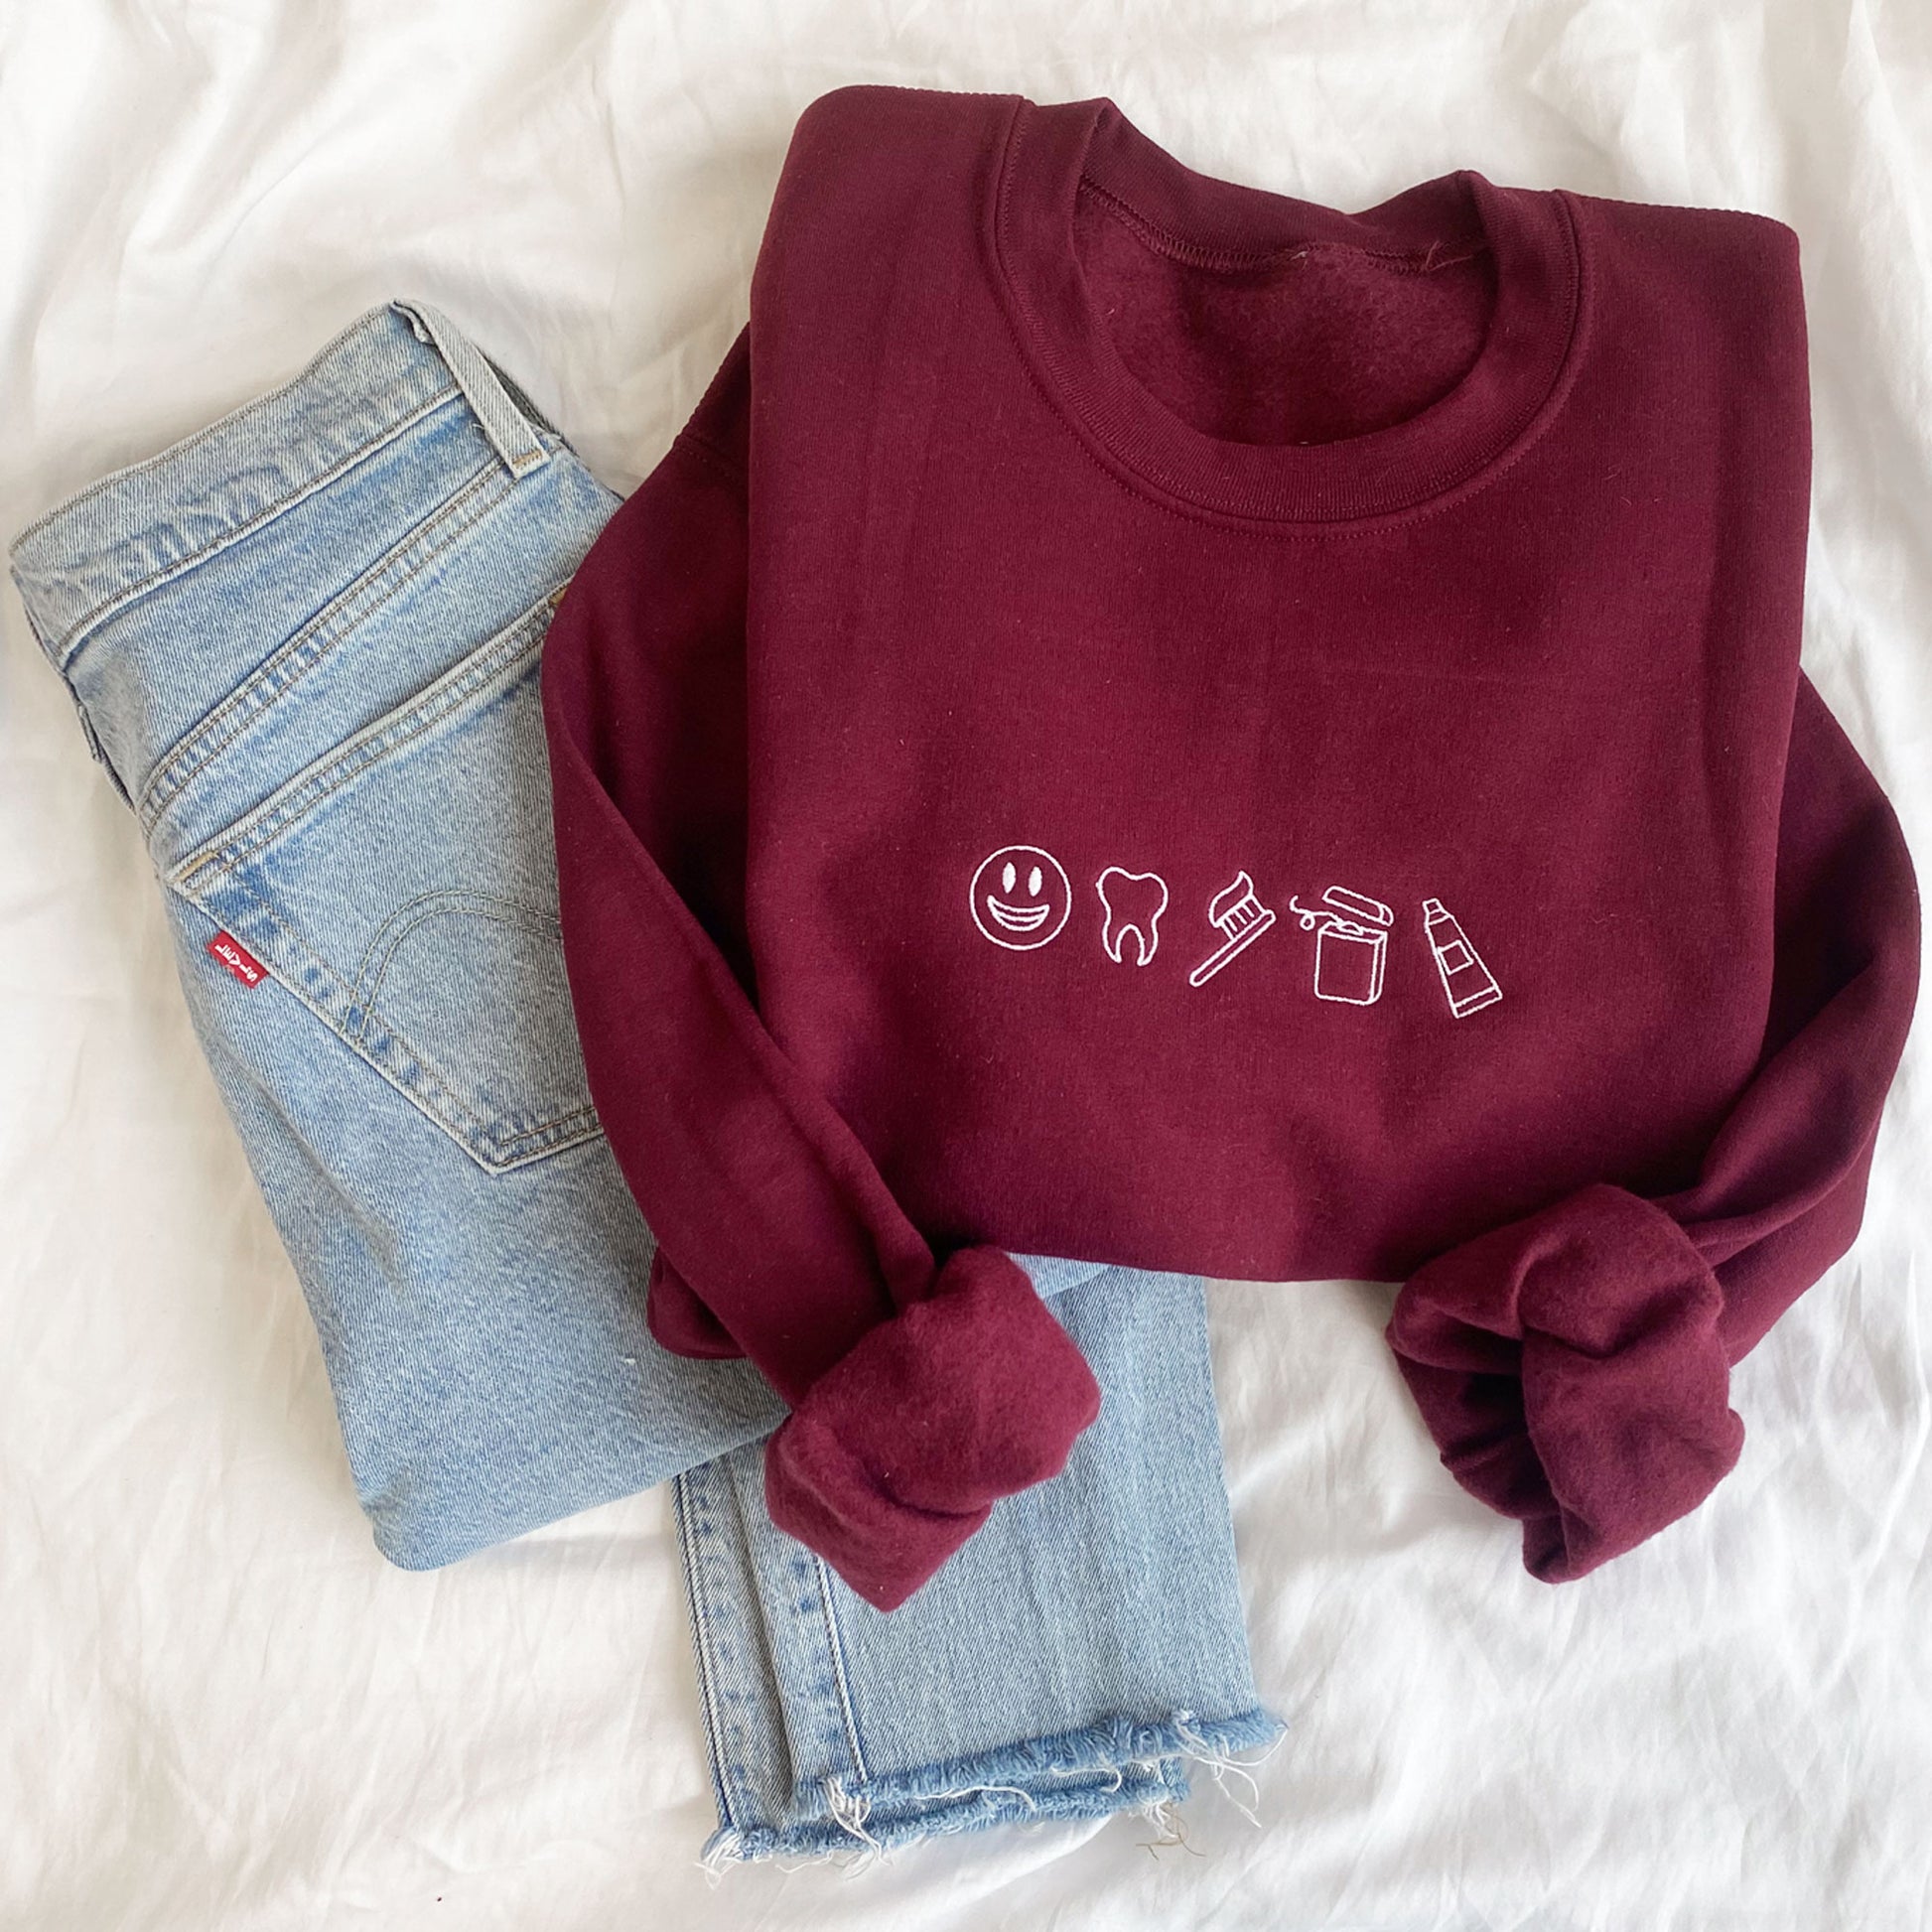 maroon crewneck sweatshirt with embroidered mini dental icons across the chest in white thread styled with blue jeans